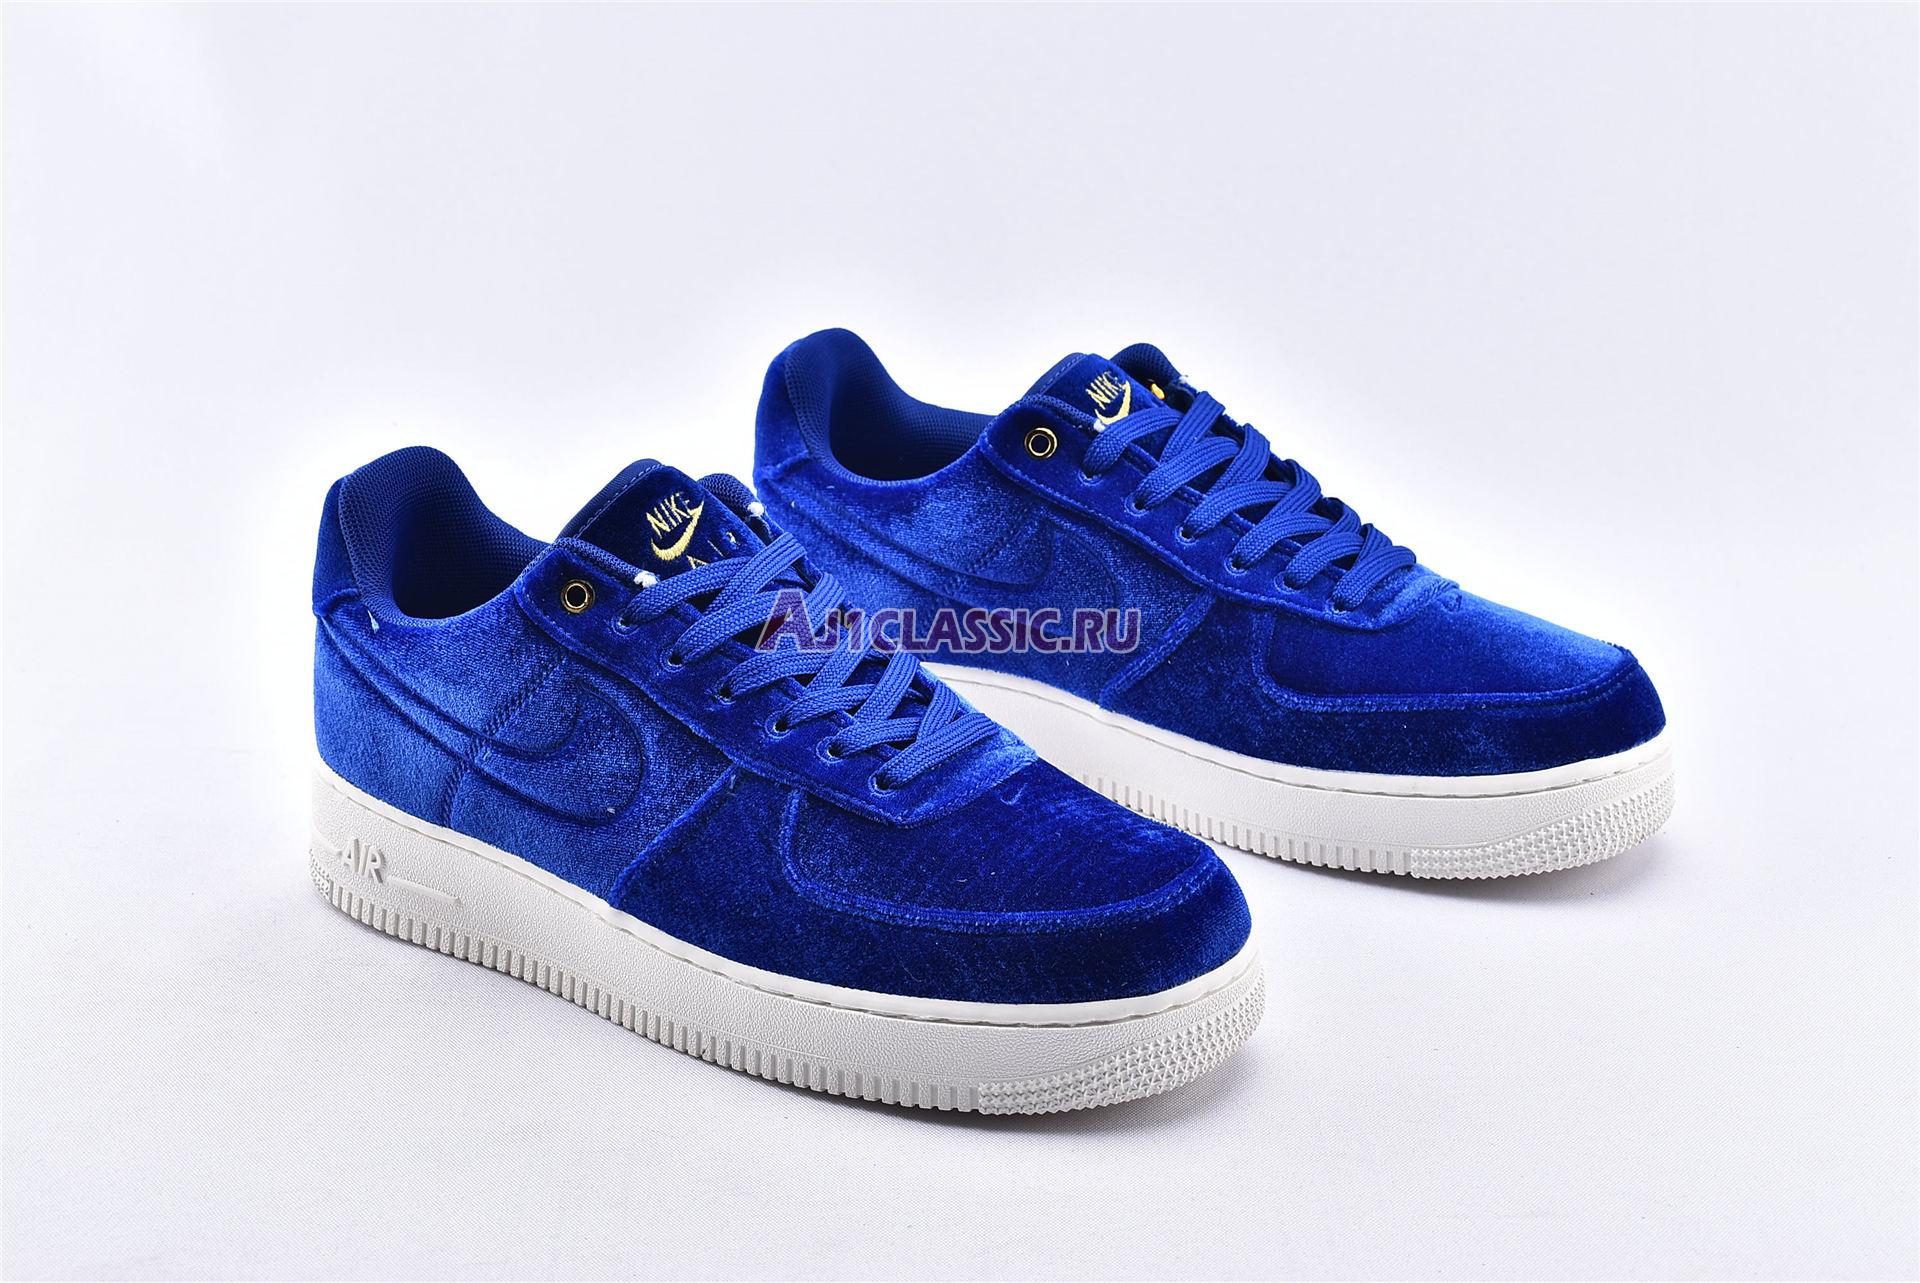 Nike Air Force 1 Low 07 Premium Blue Void AT4144400 Blue Void/Blue